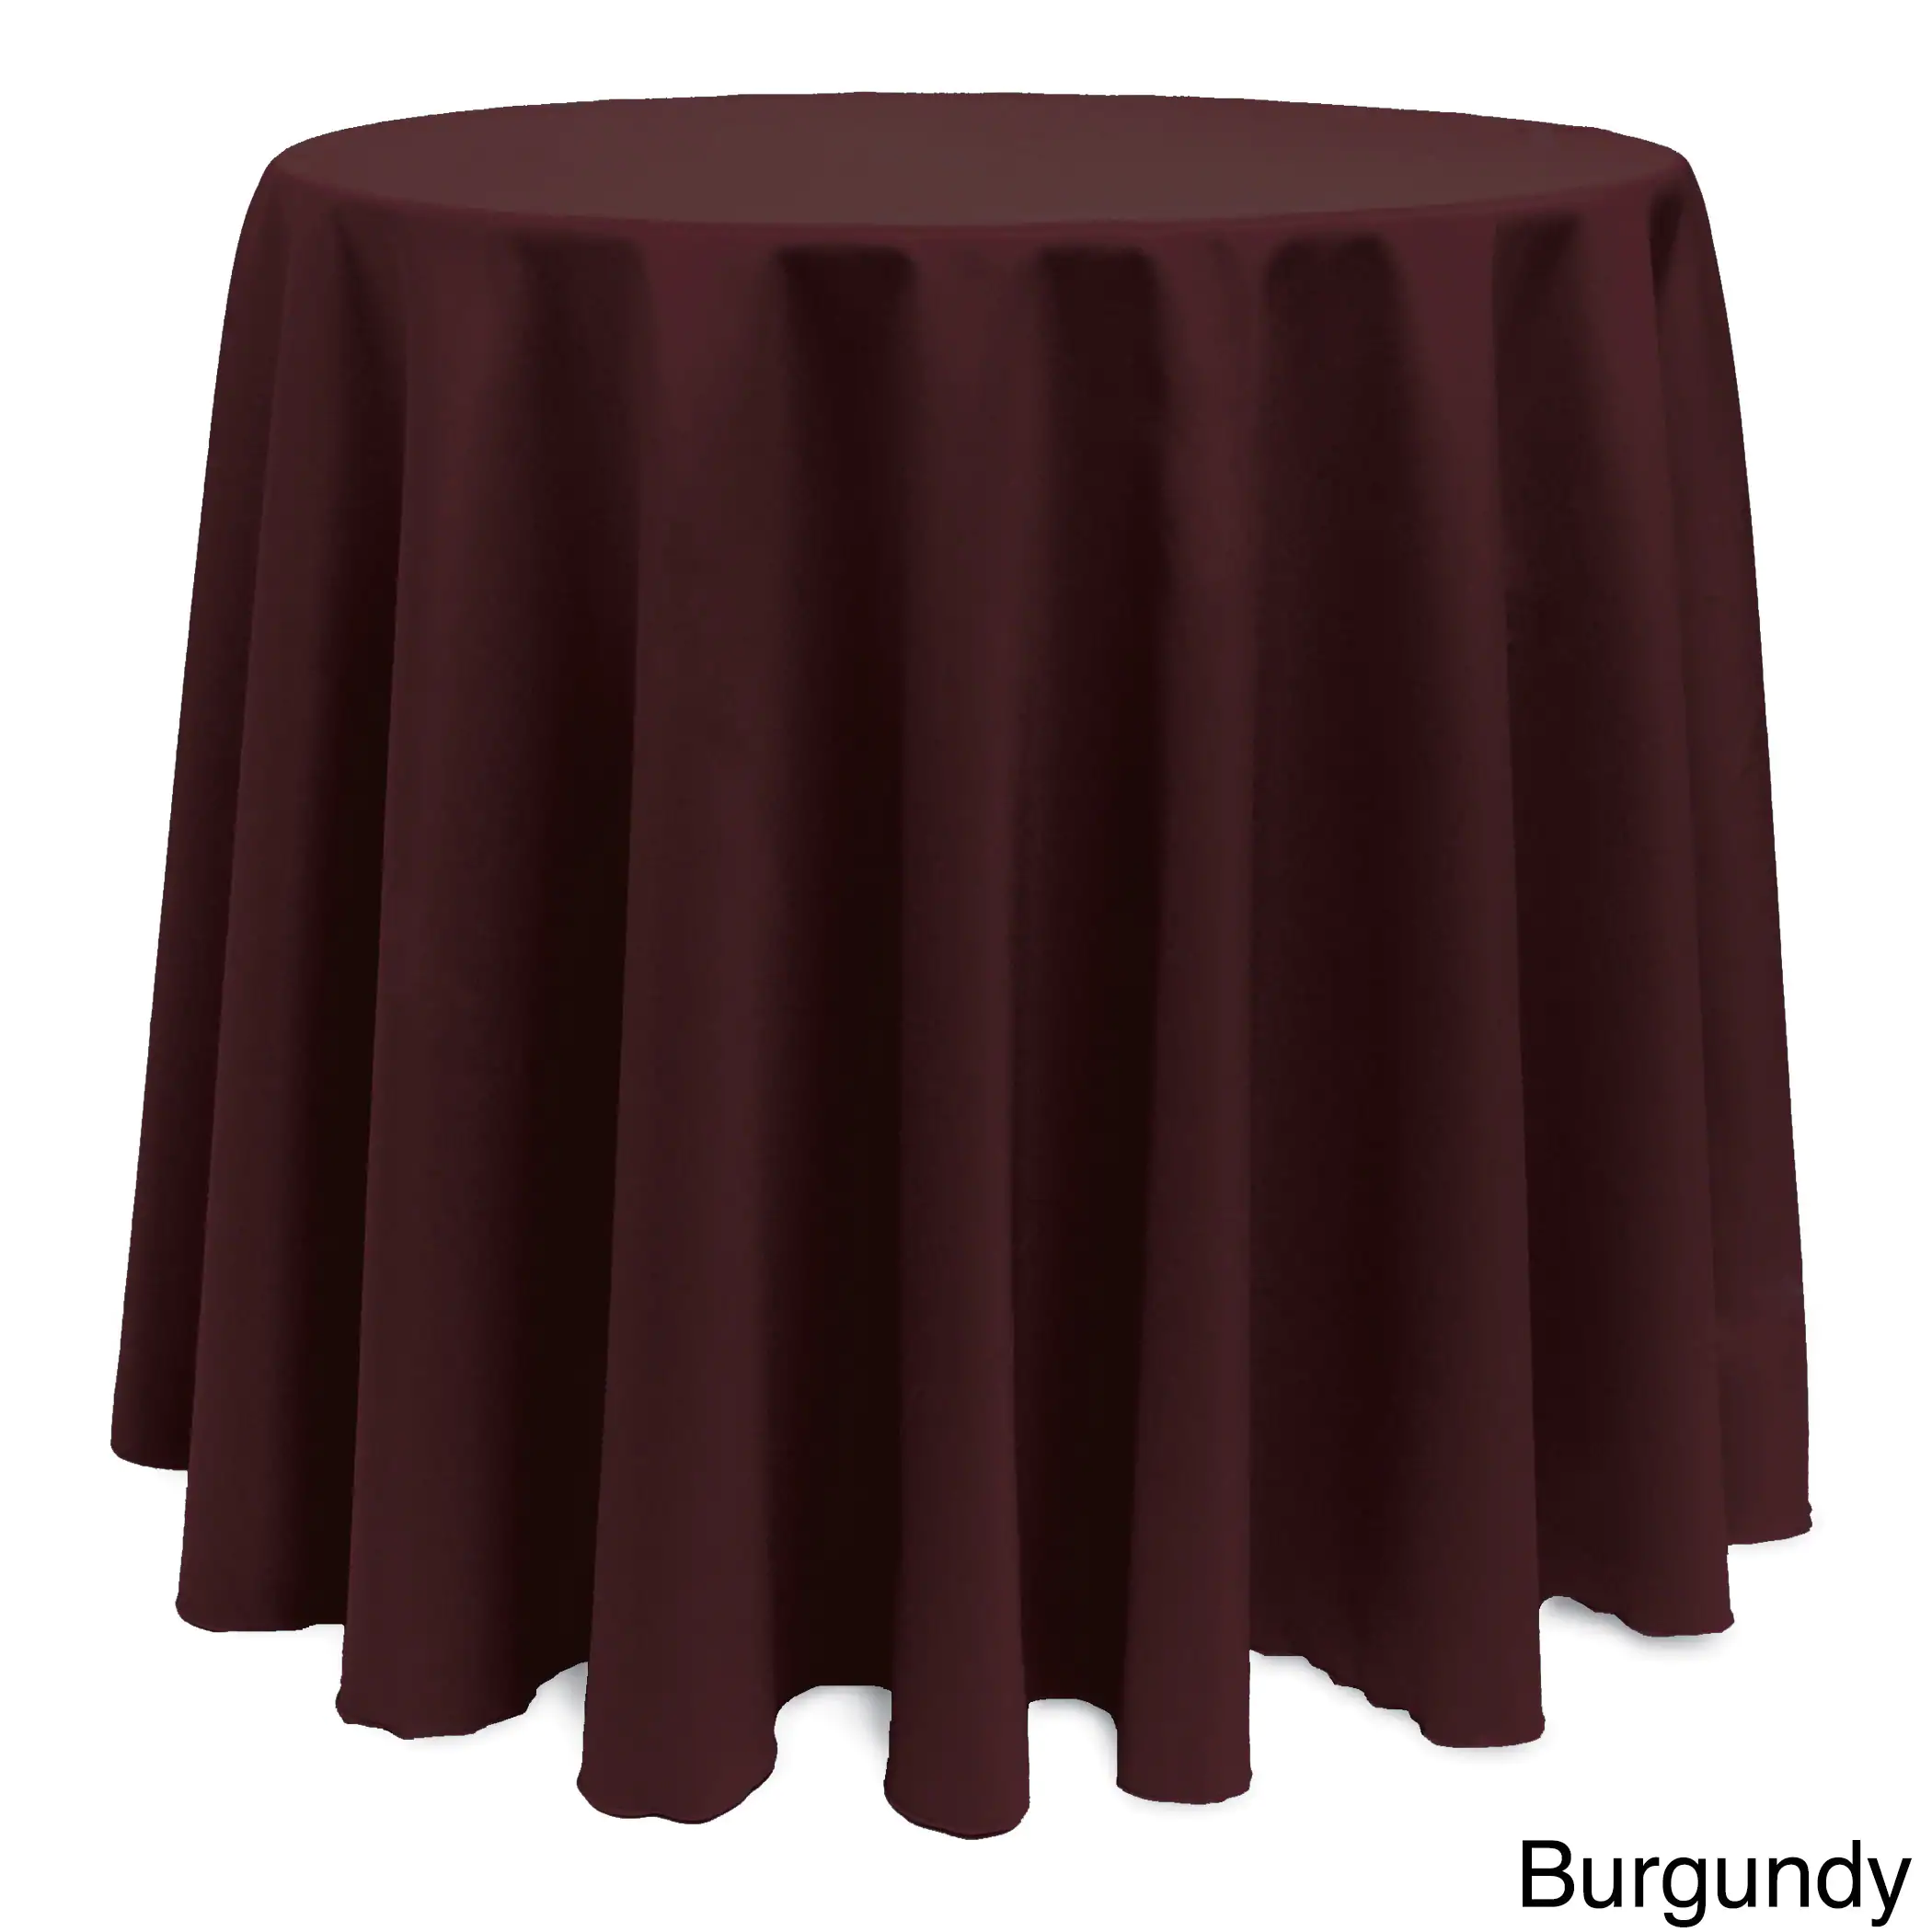 vibrant solid color inch round tablecloth free shipping for accent table with chair cushions small living room chairs target vases narrow console hallway modern outdoor tall